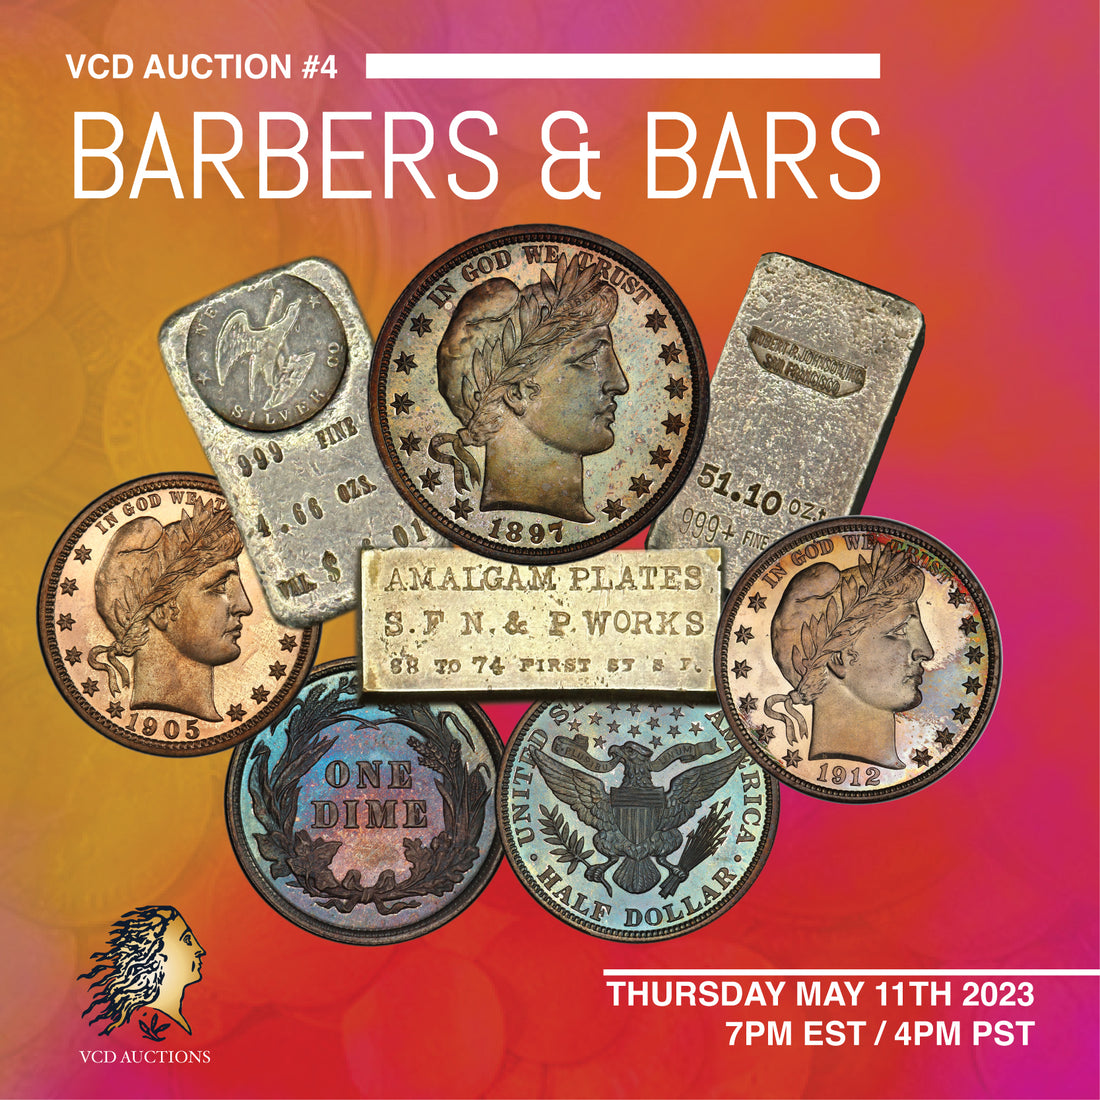 VCD Auction #4 The Barbers & Bars Sale